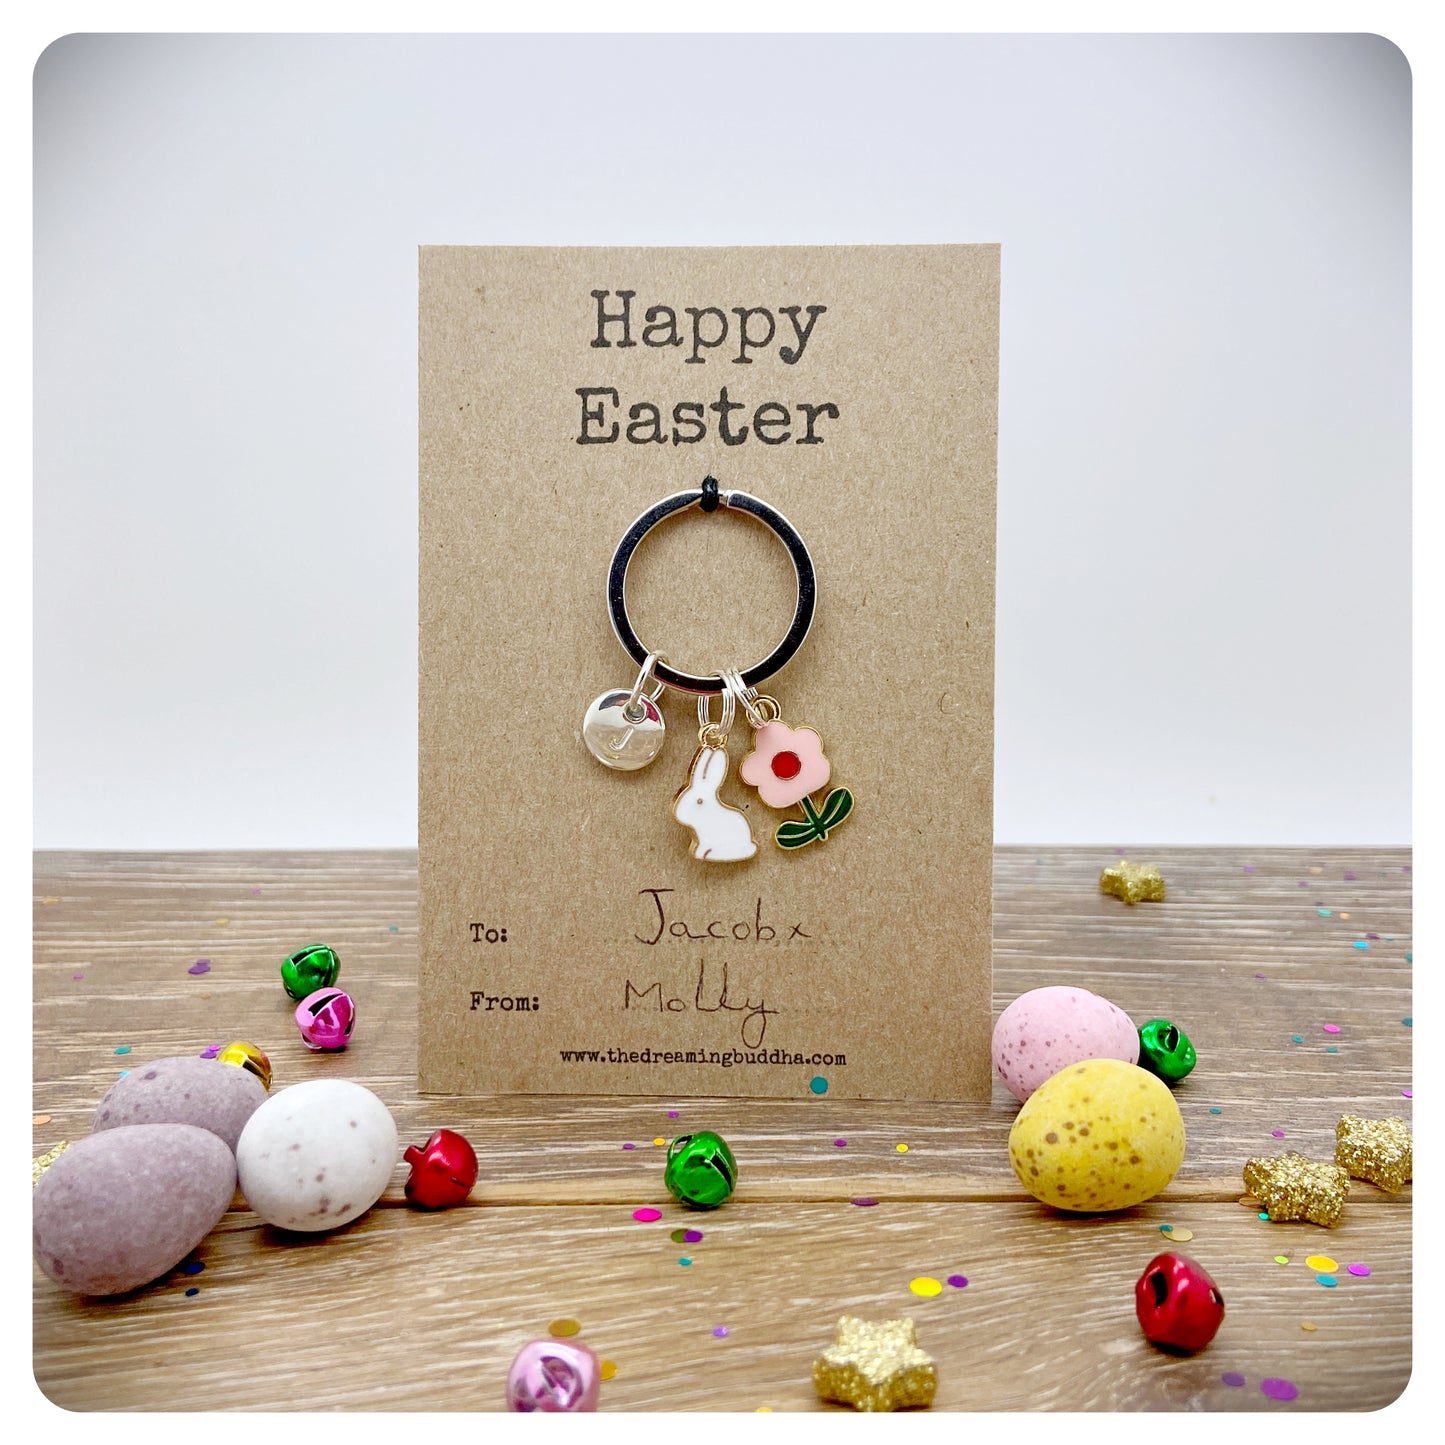 Happy Easter Keyring Card, Childrens Easter Bag Charm, Cute Flower Bunny Keychain, Easter Egg Hunt Gift, Easter Friends and Family Gift